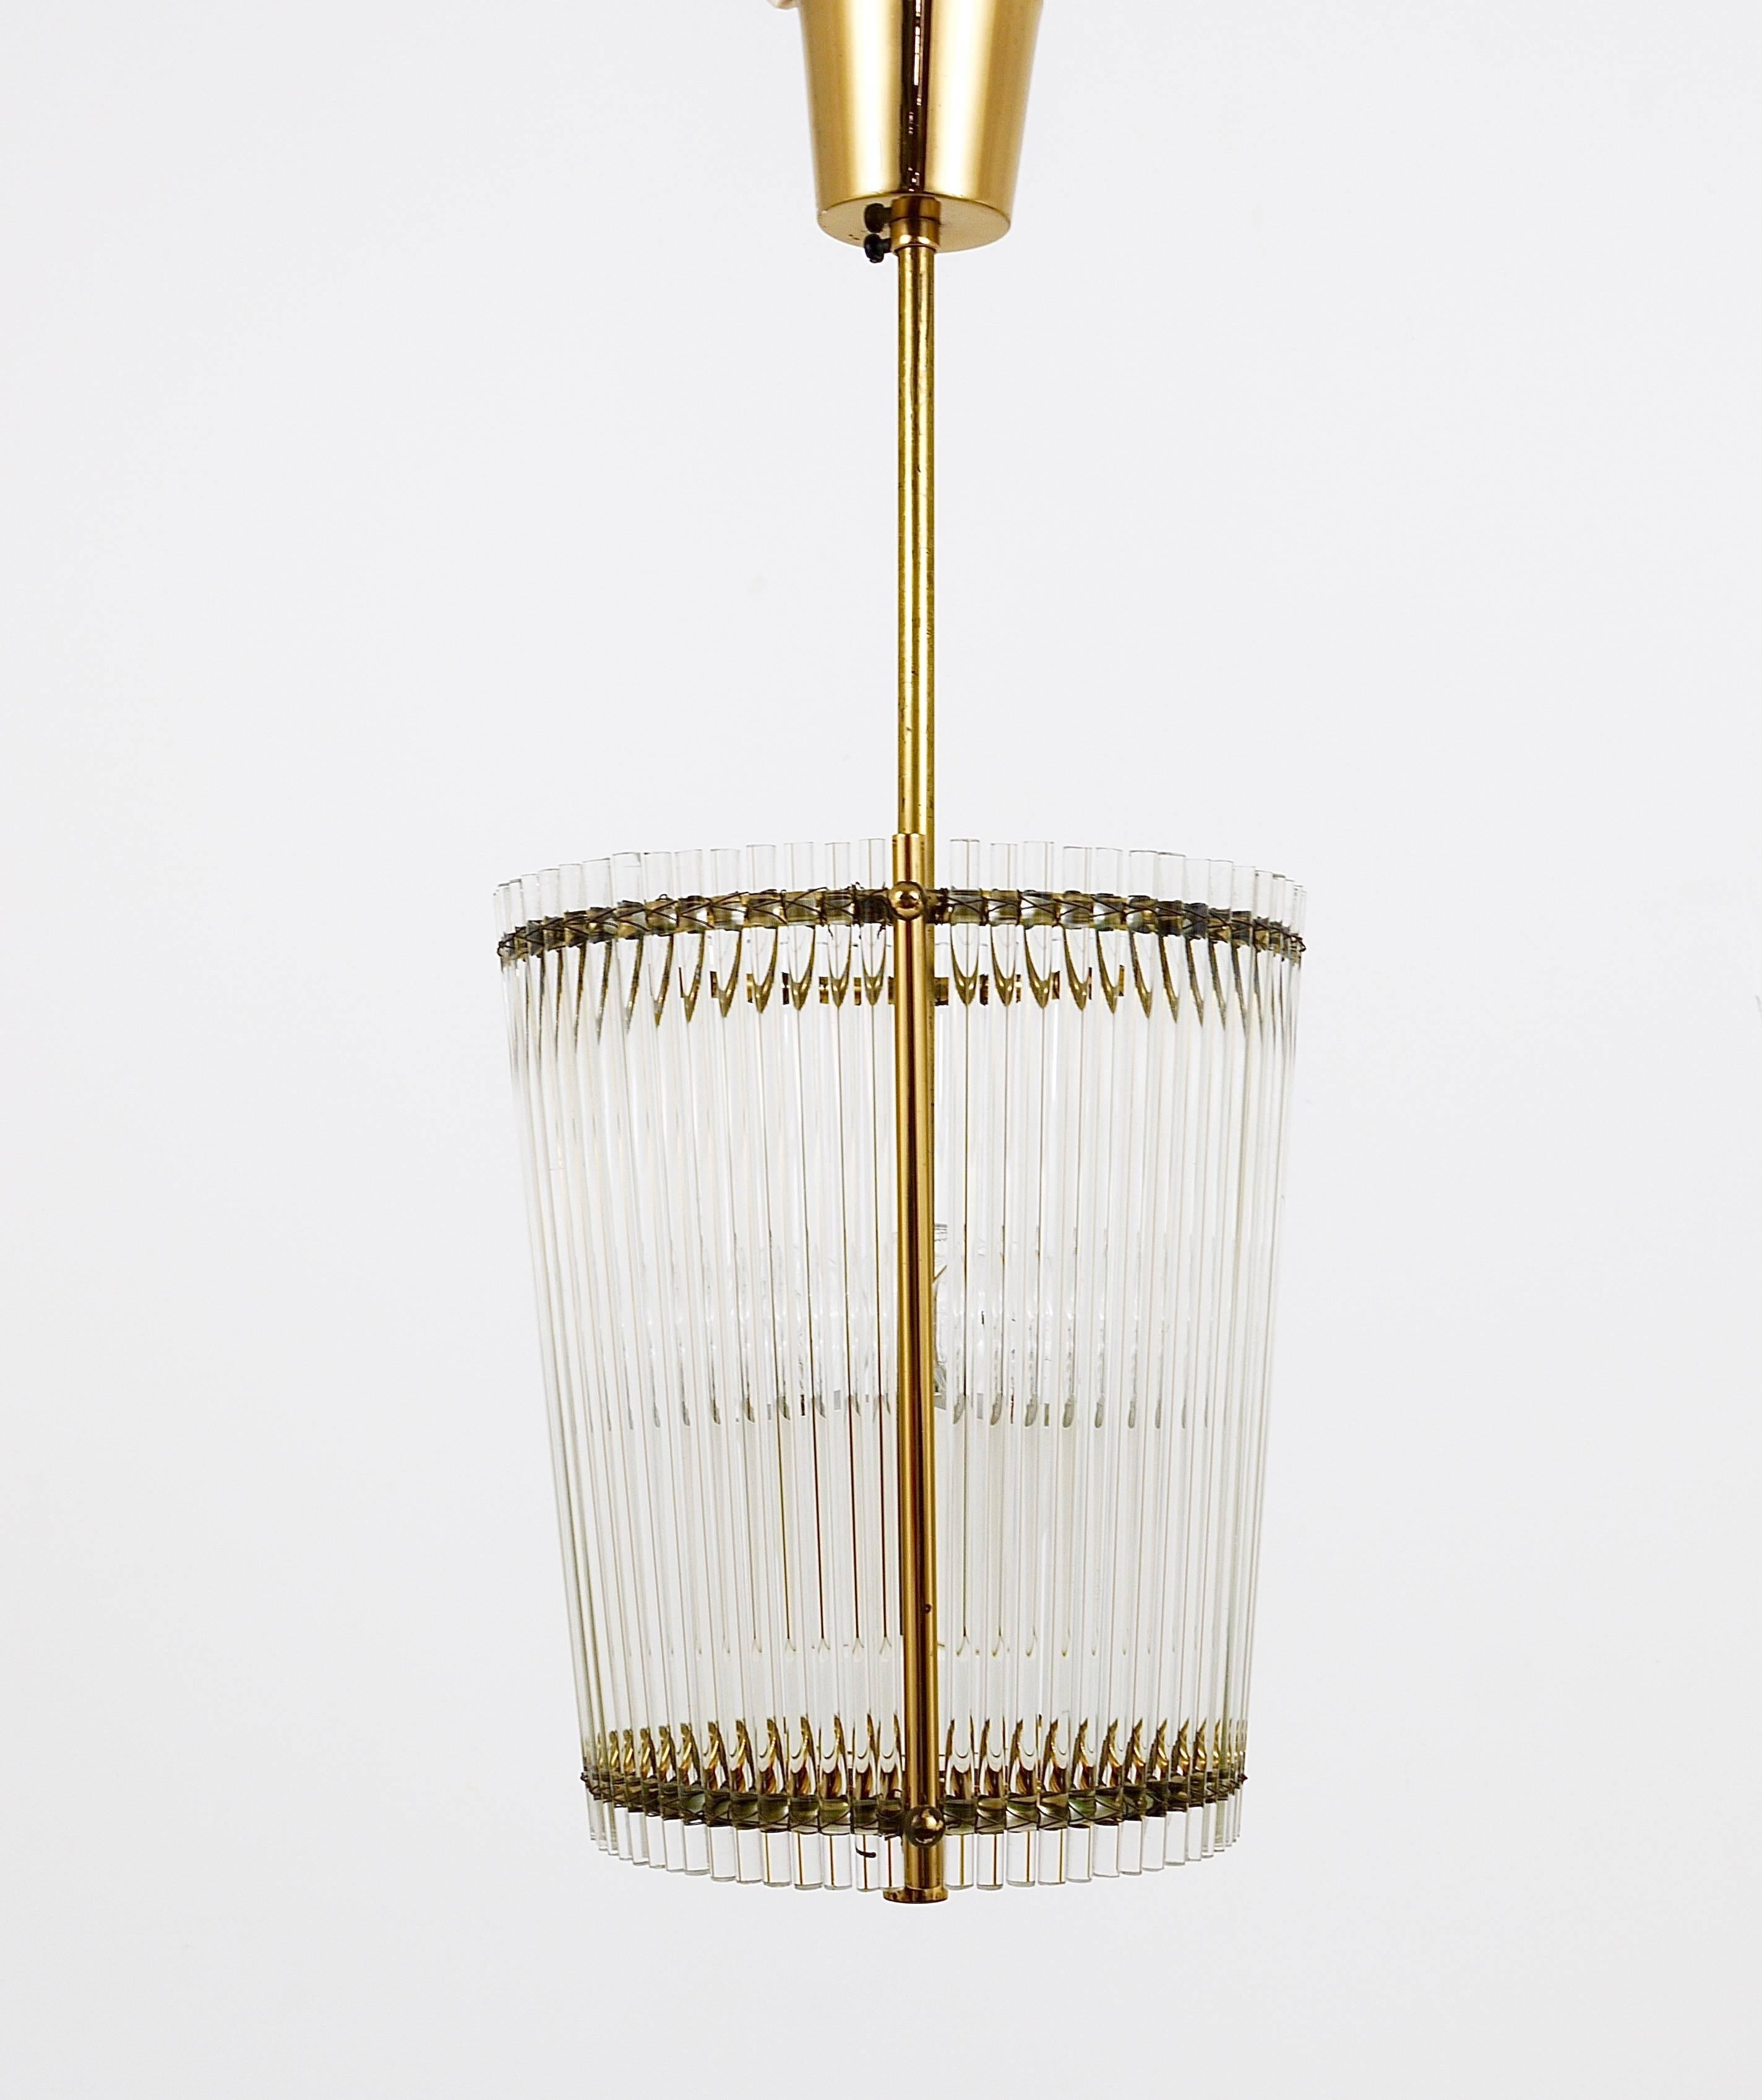 A charming modernist brass drum chandelier with glass rods. Made in Italy in the 1950s. Three light sources. In good condition with charming patina on the brass.

diameter 8